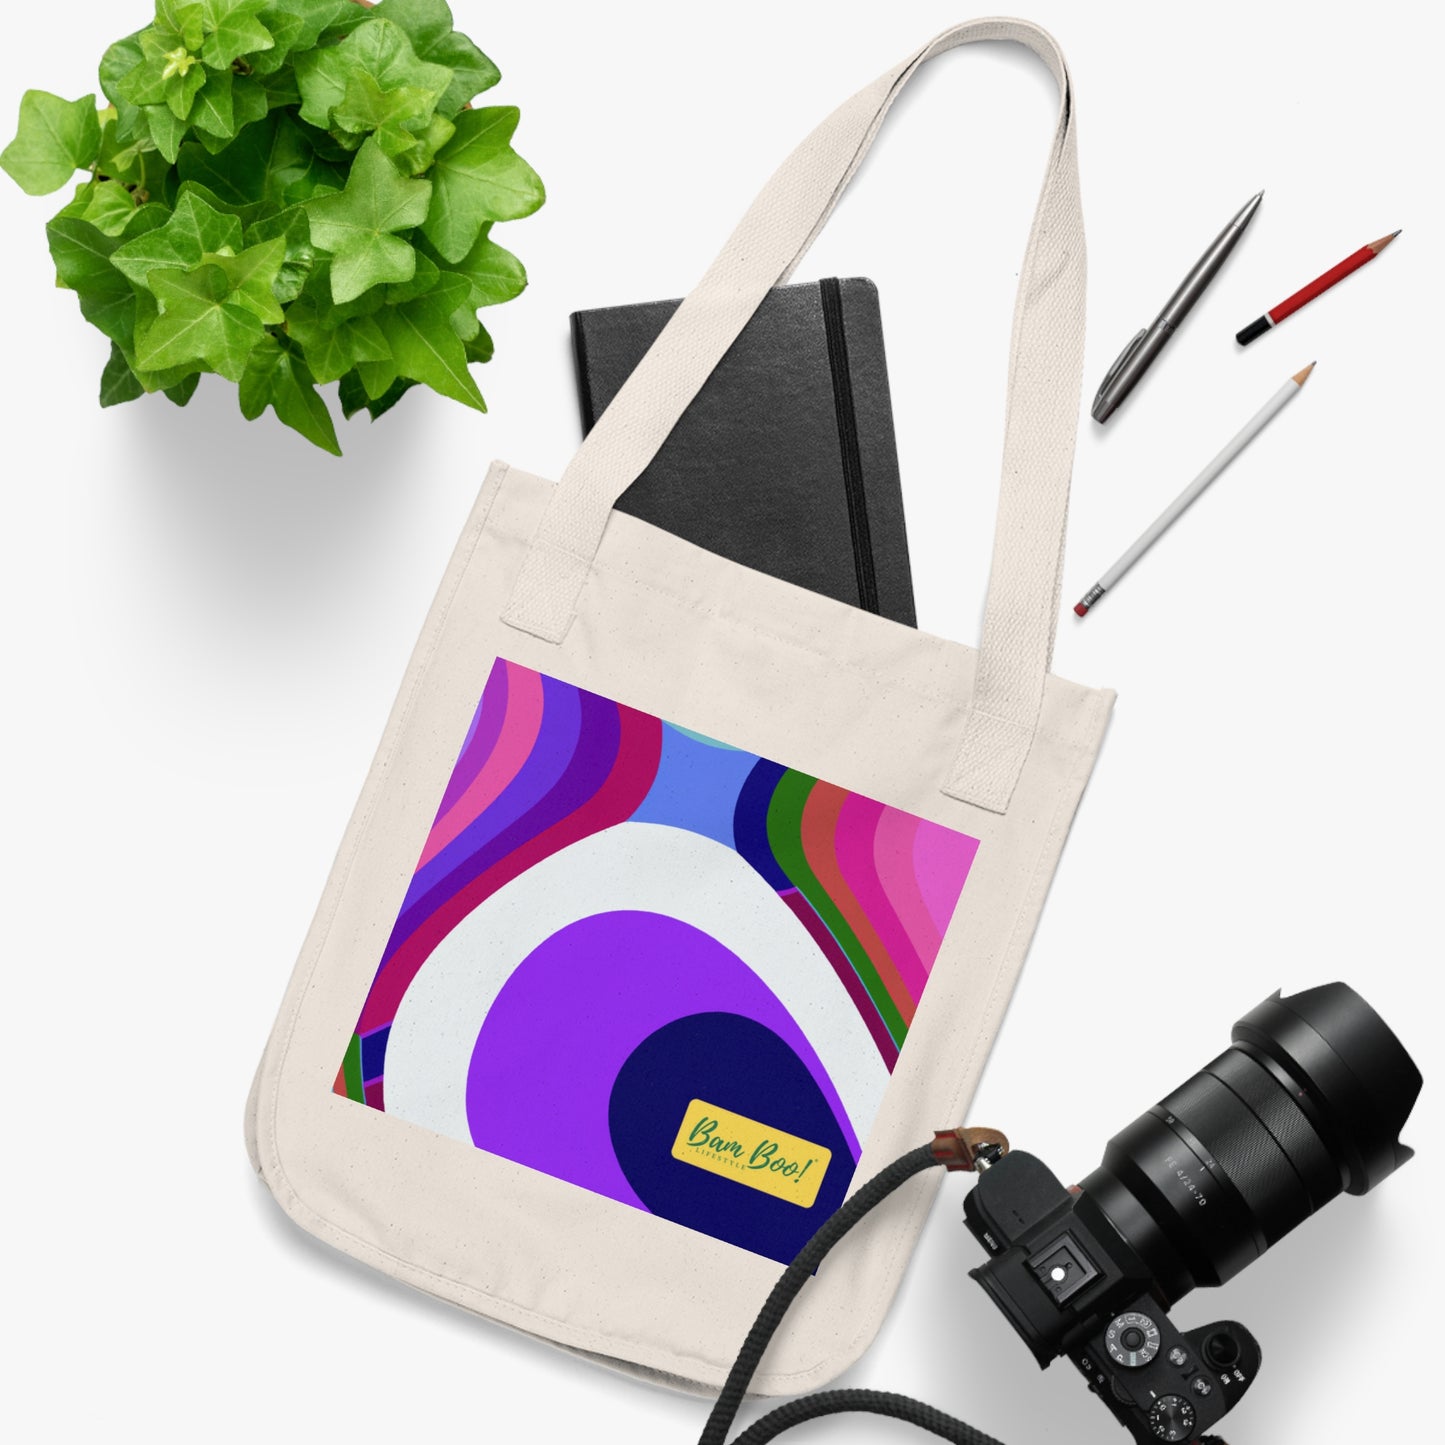 "The Art of My Perspective: An Expression of the World Through Shapes, Colors, and Patterns" - Bam Boo! Lifestyle Eco-friendly Tote Bag